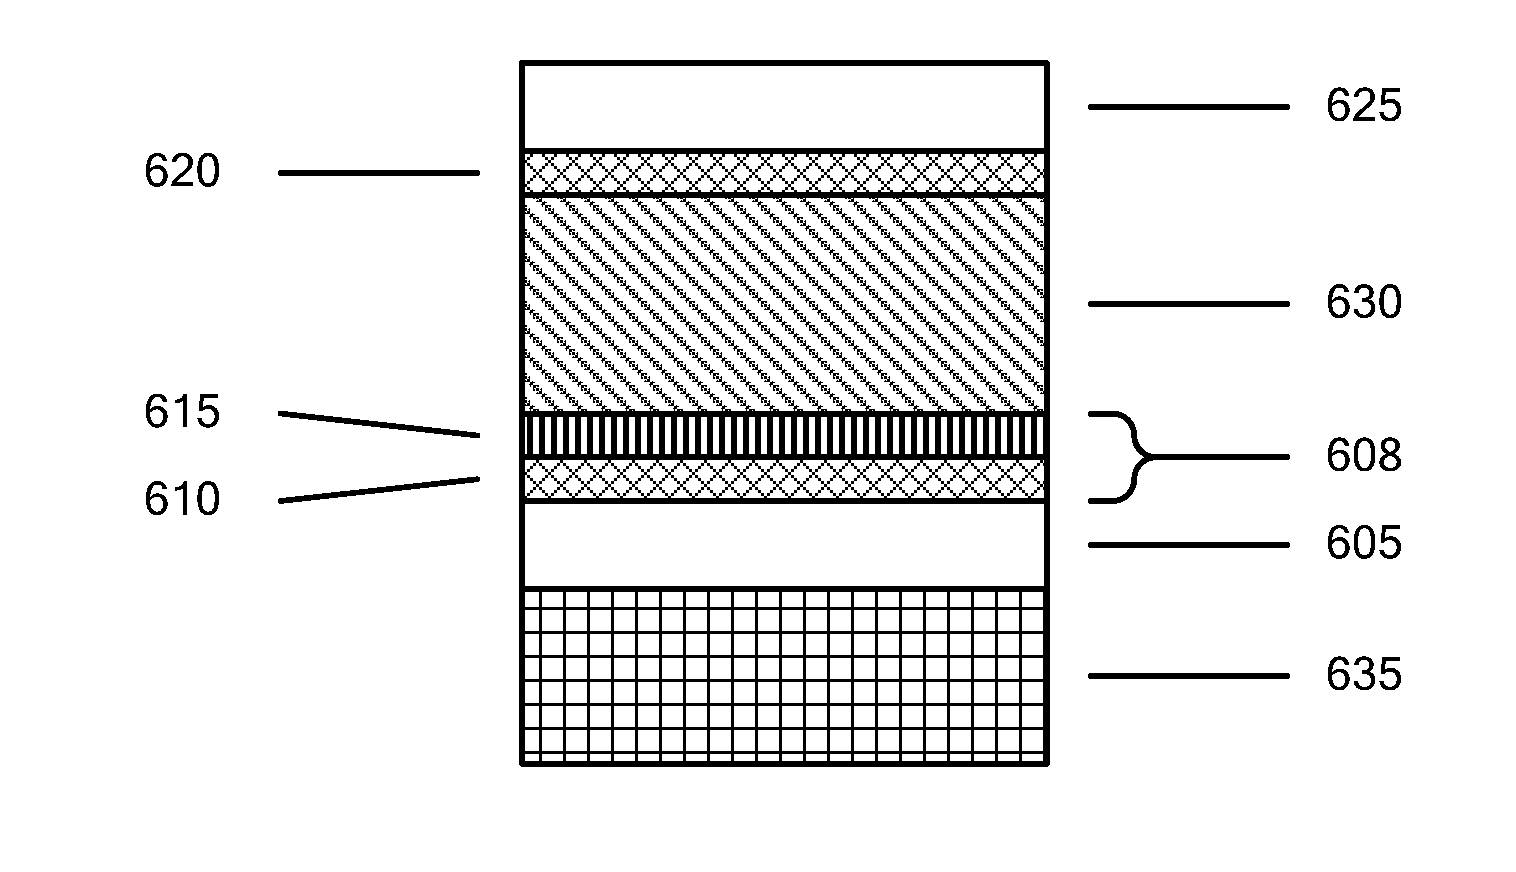 Capacitive touch panel with force sensing